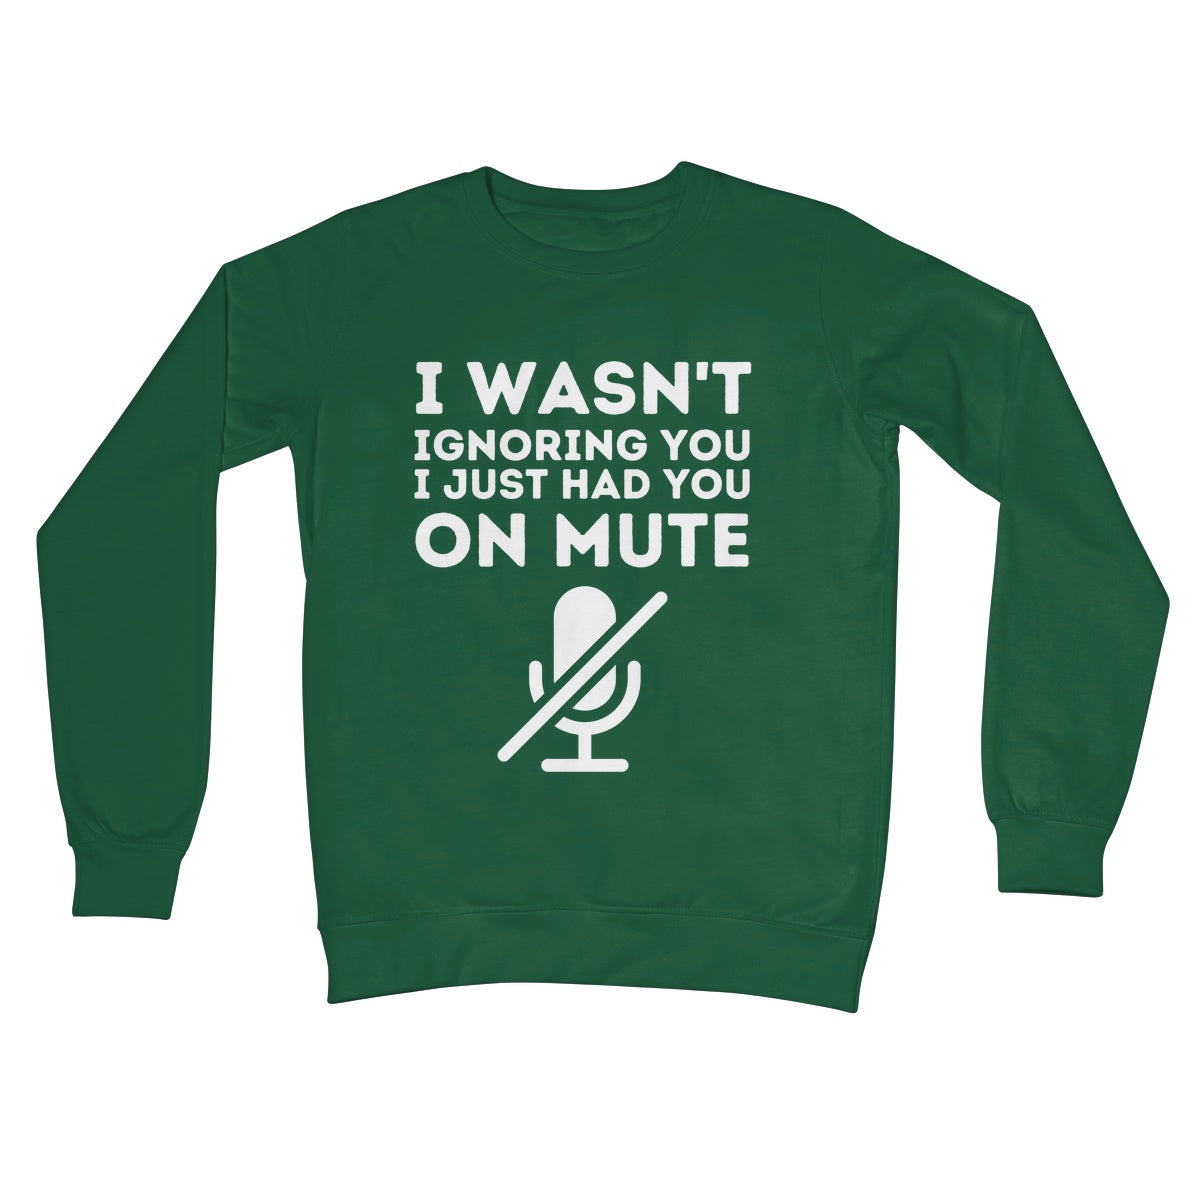 I just had you on mute jumper green